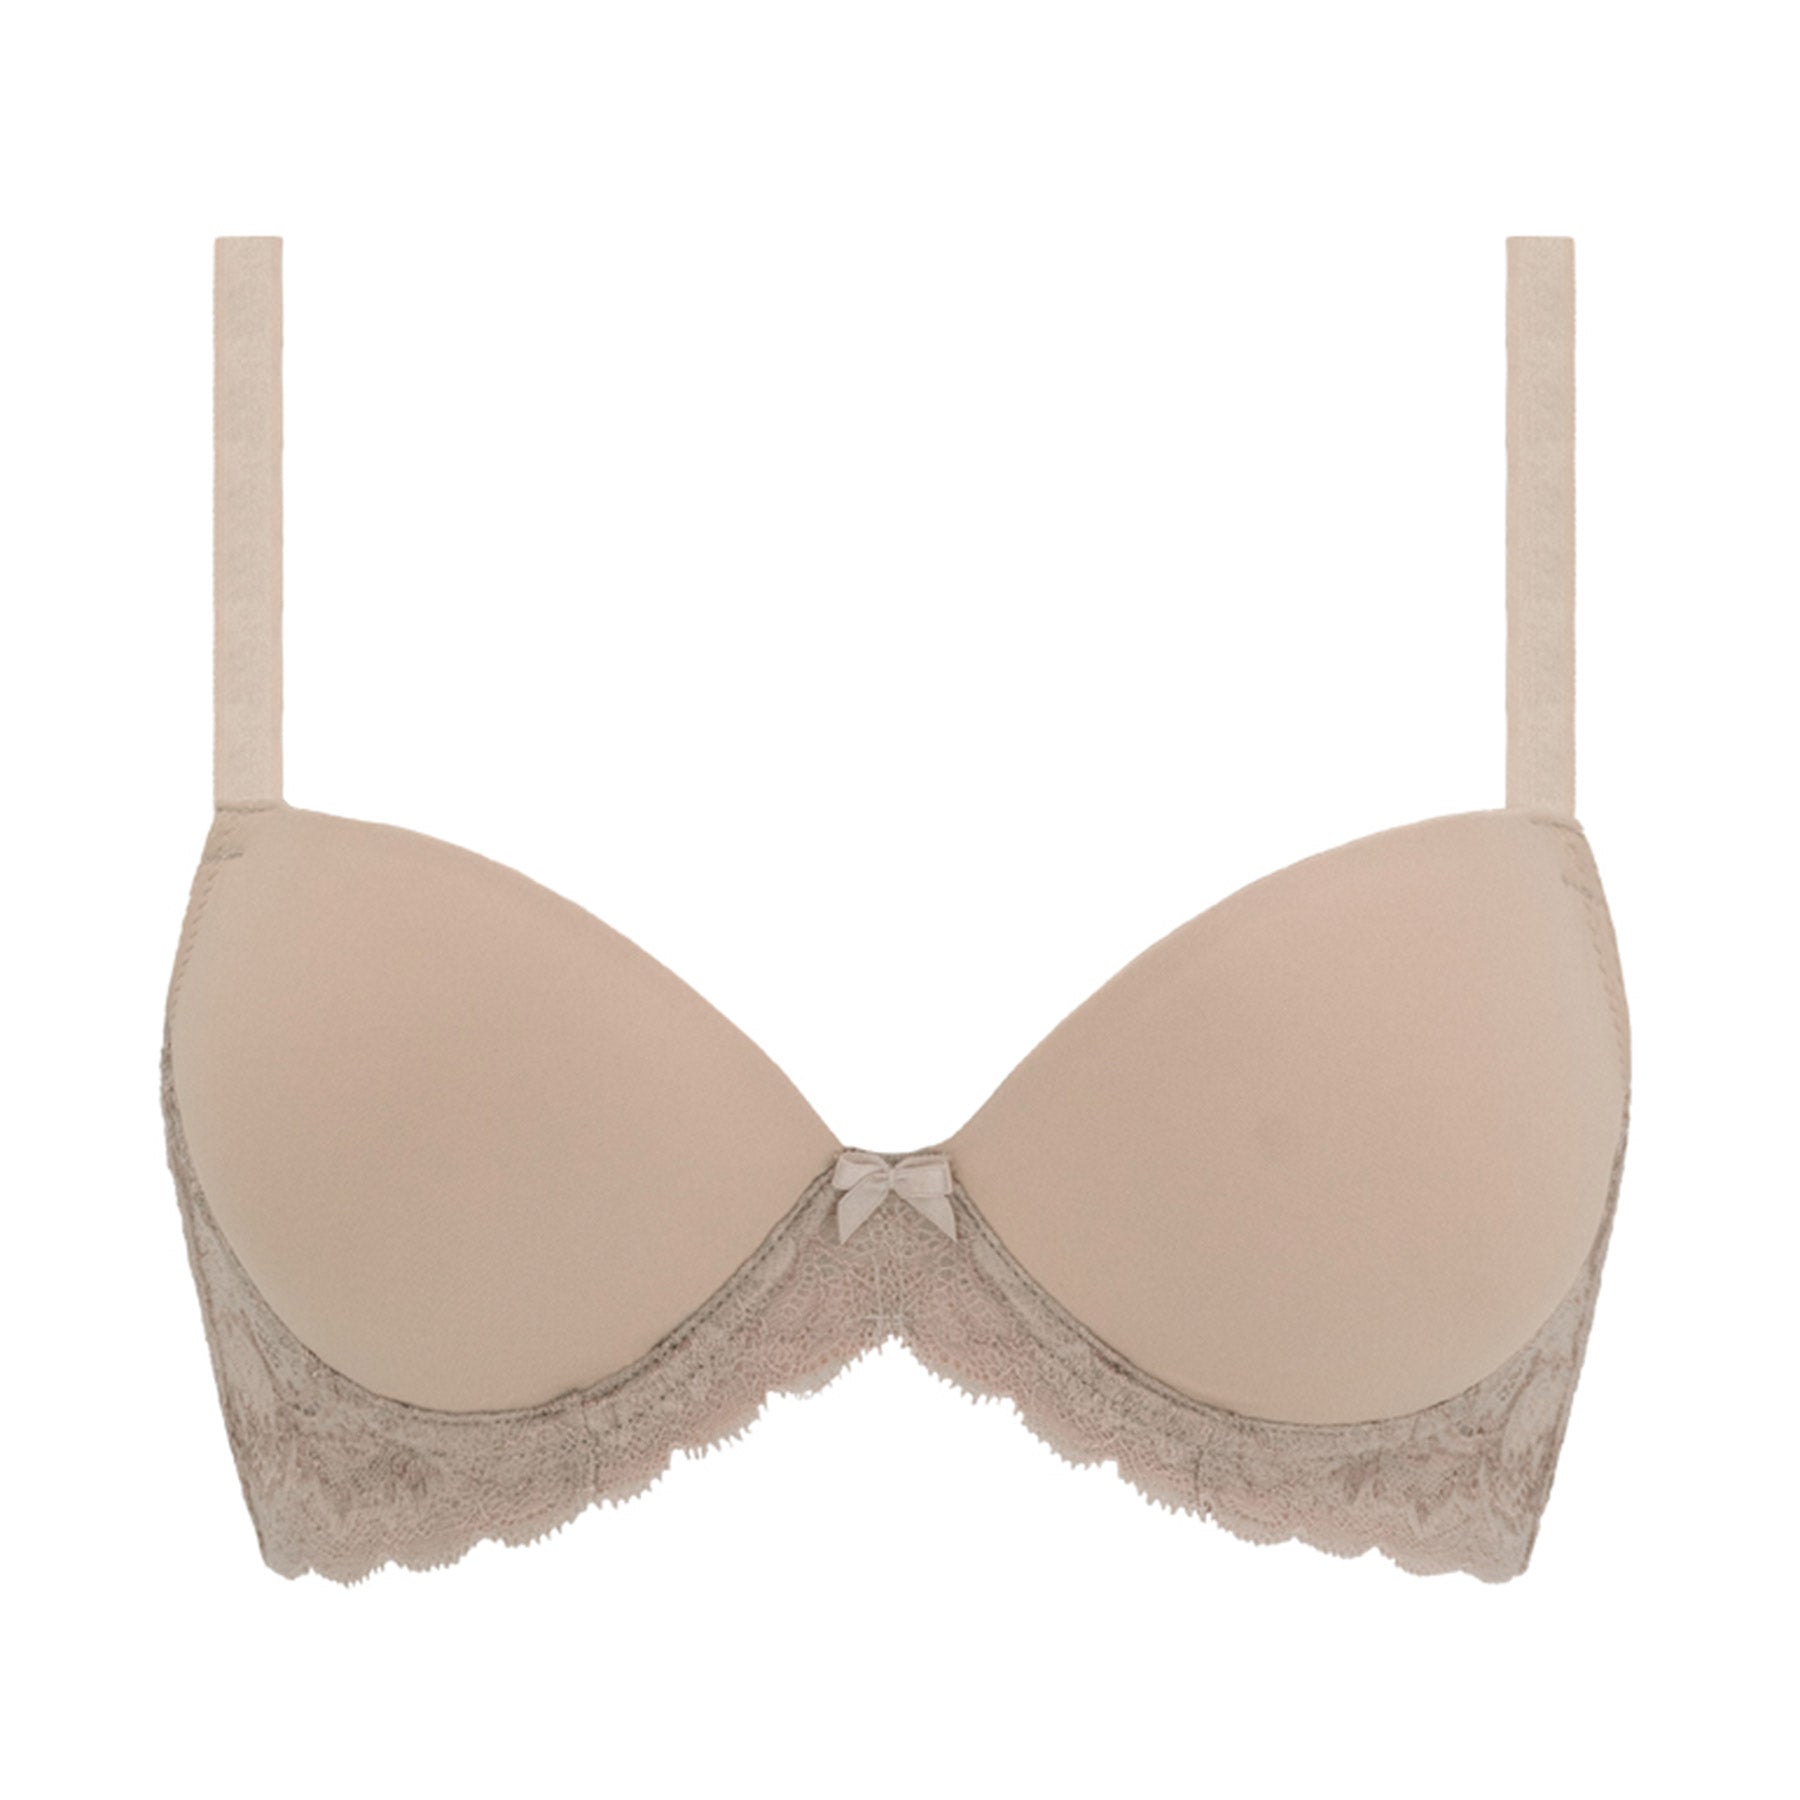 Soft Cotton Tee Shirt Moulded Bra in Mocha